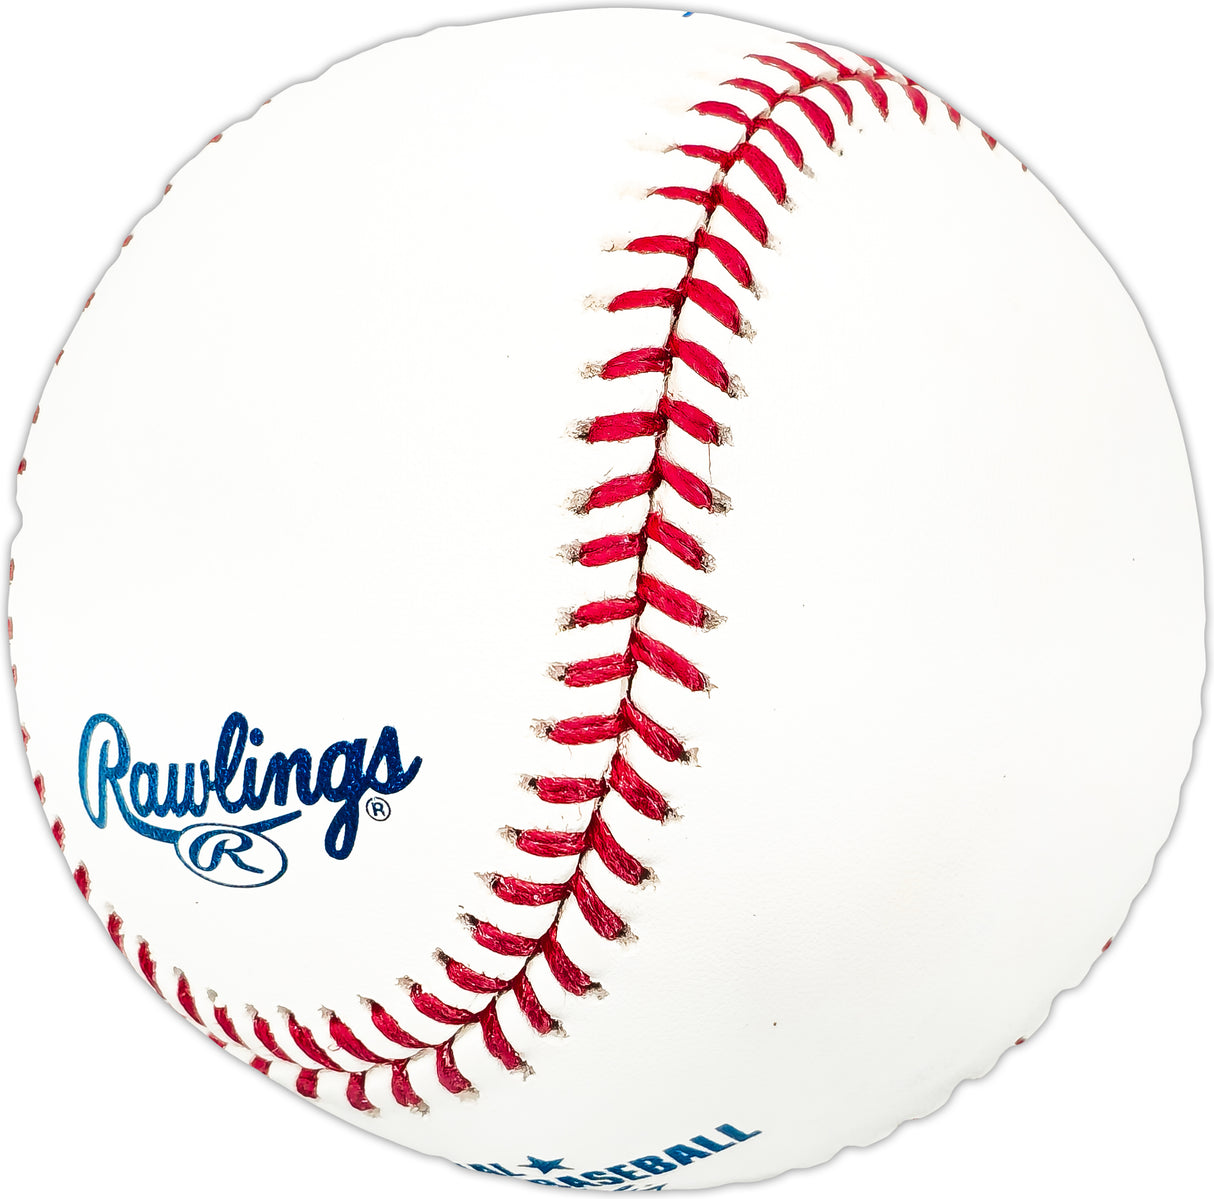 Bill Dailey Autographed Official MLB Baseball Cleveland Indians, Detroit Tigers SKU #225630